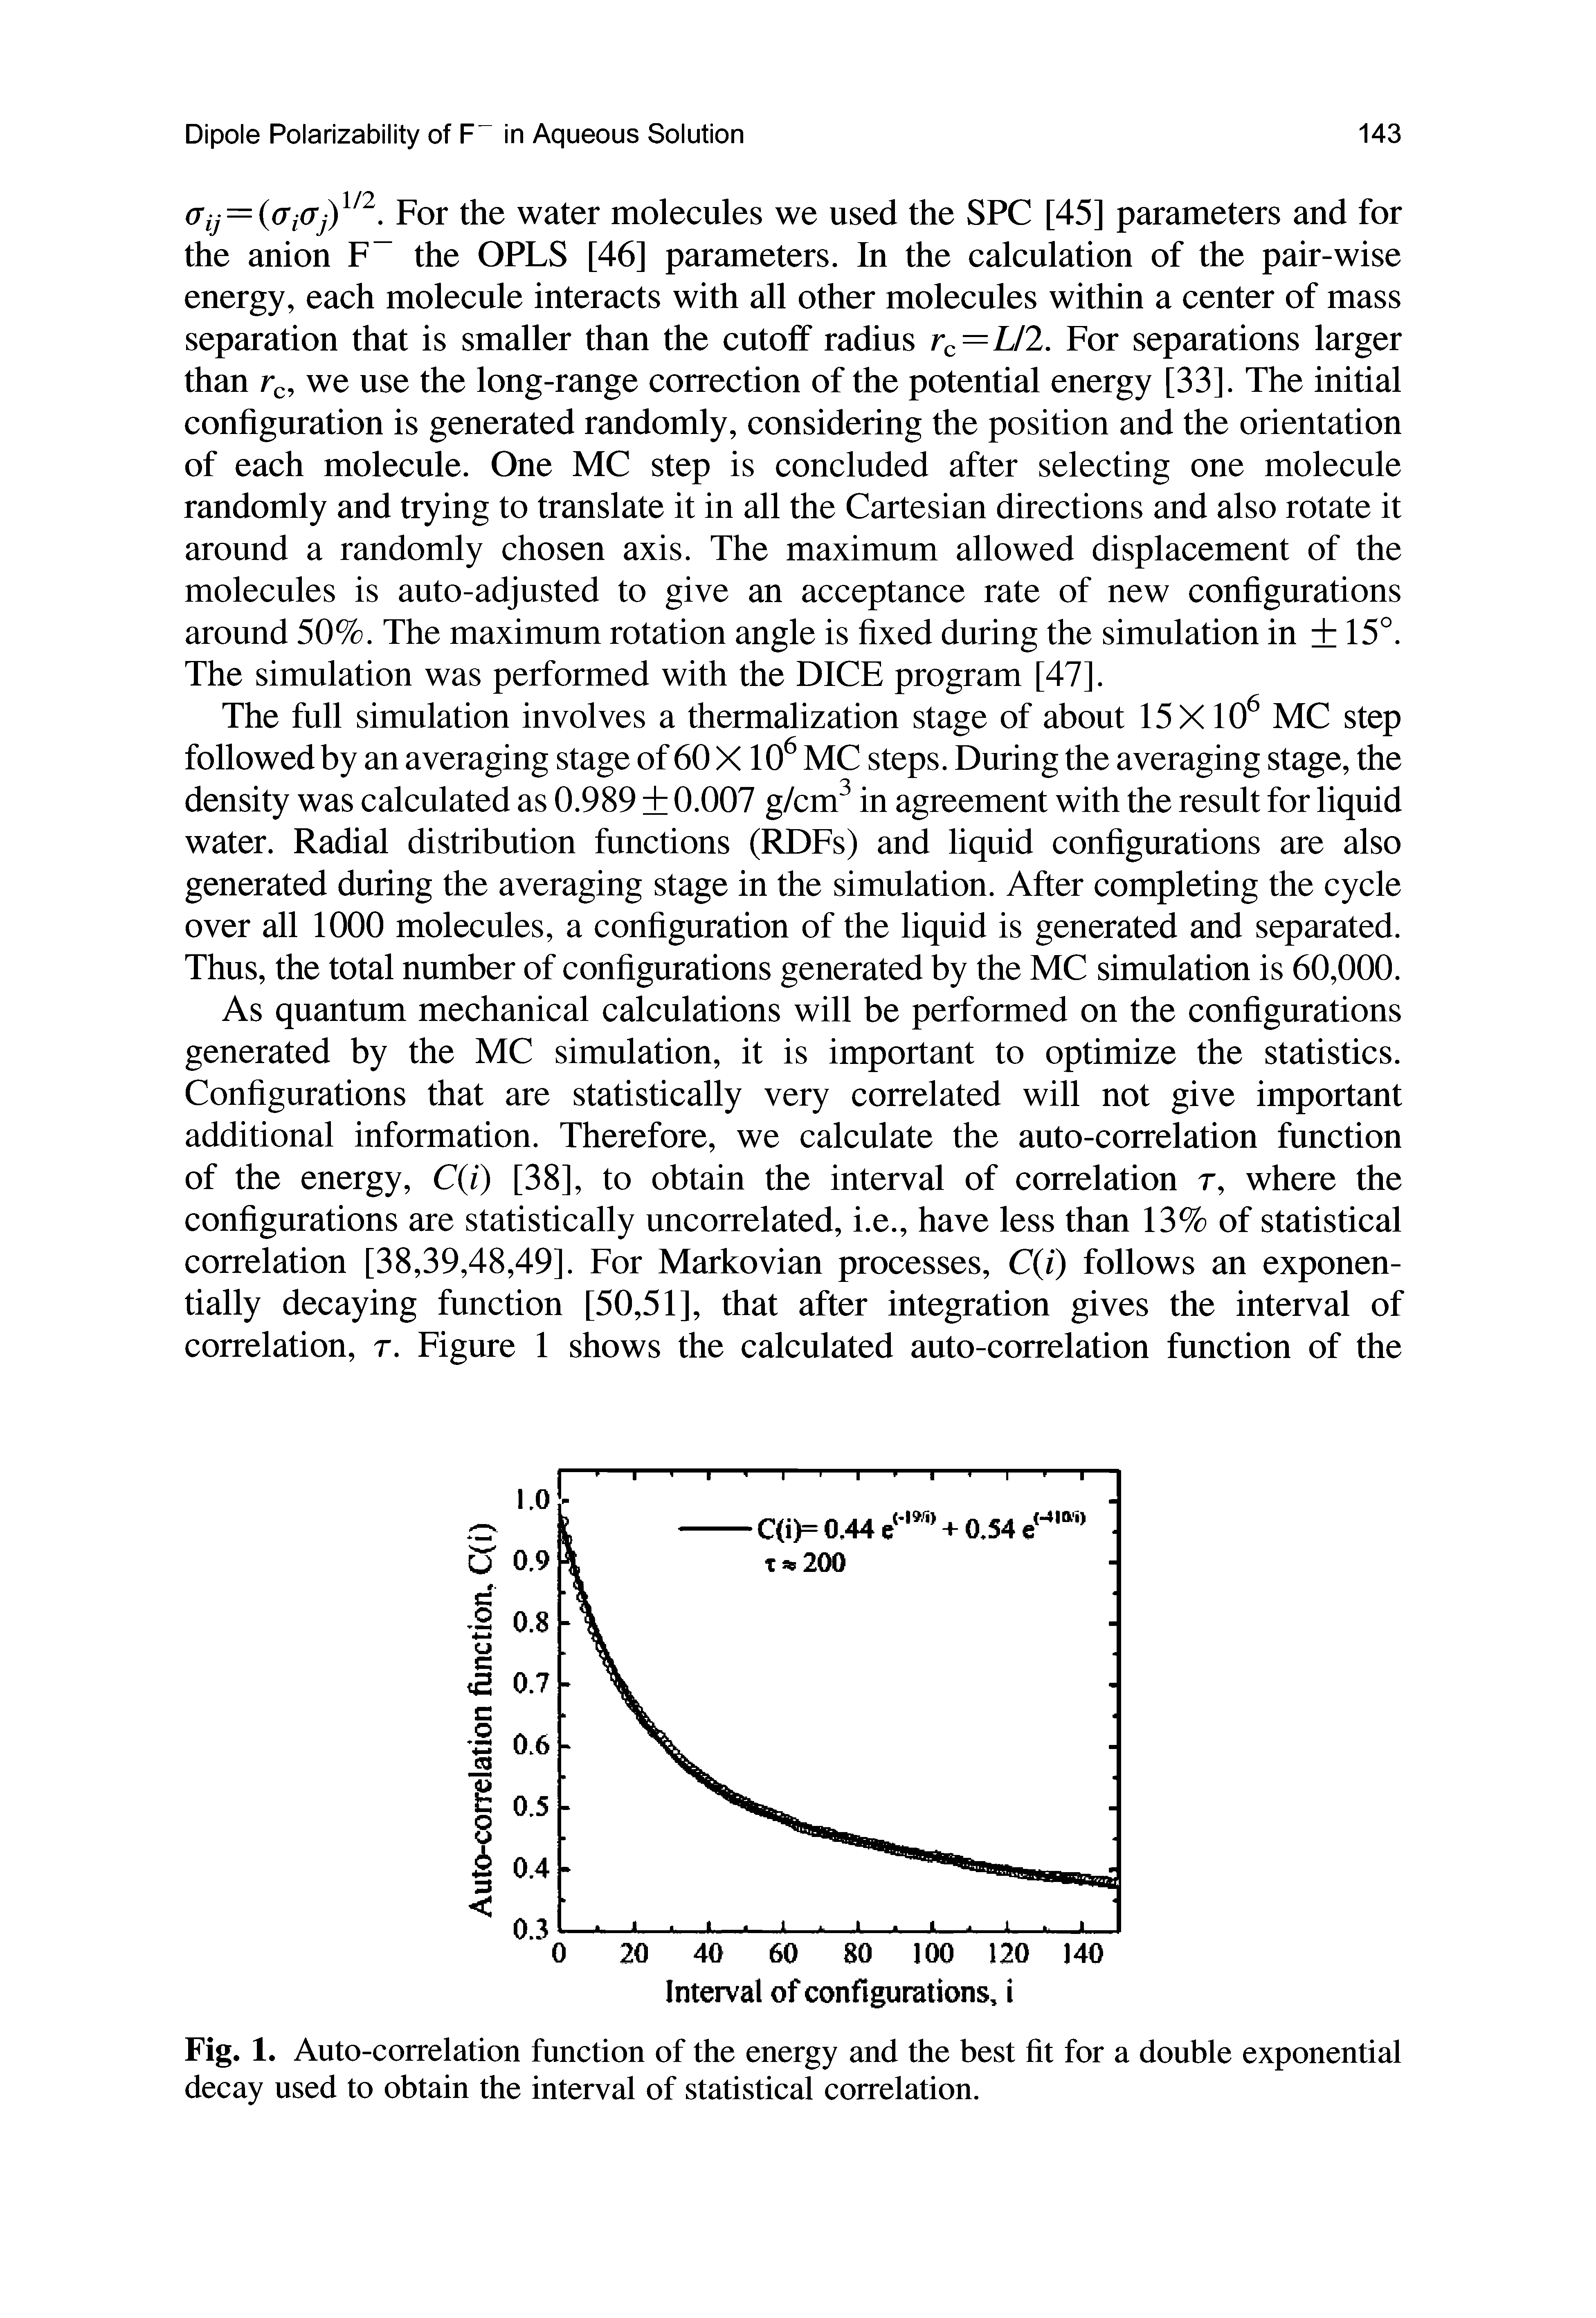 Fig. 1. Auto-correlation function of the energy and the best fit for a double exponential decay used to obtain the interval of statistical correlation.